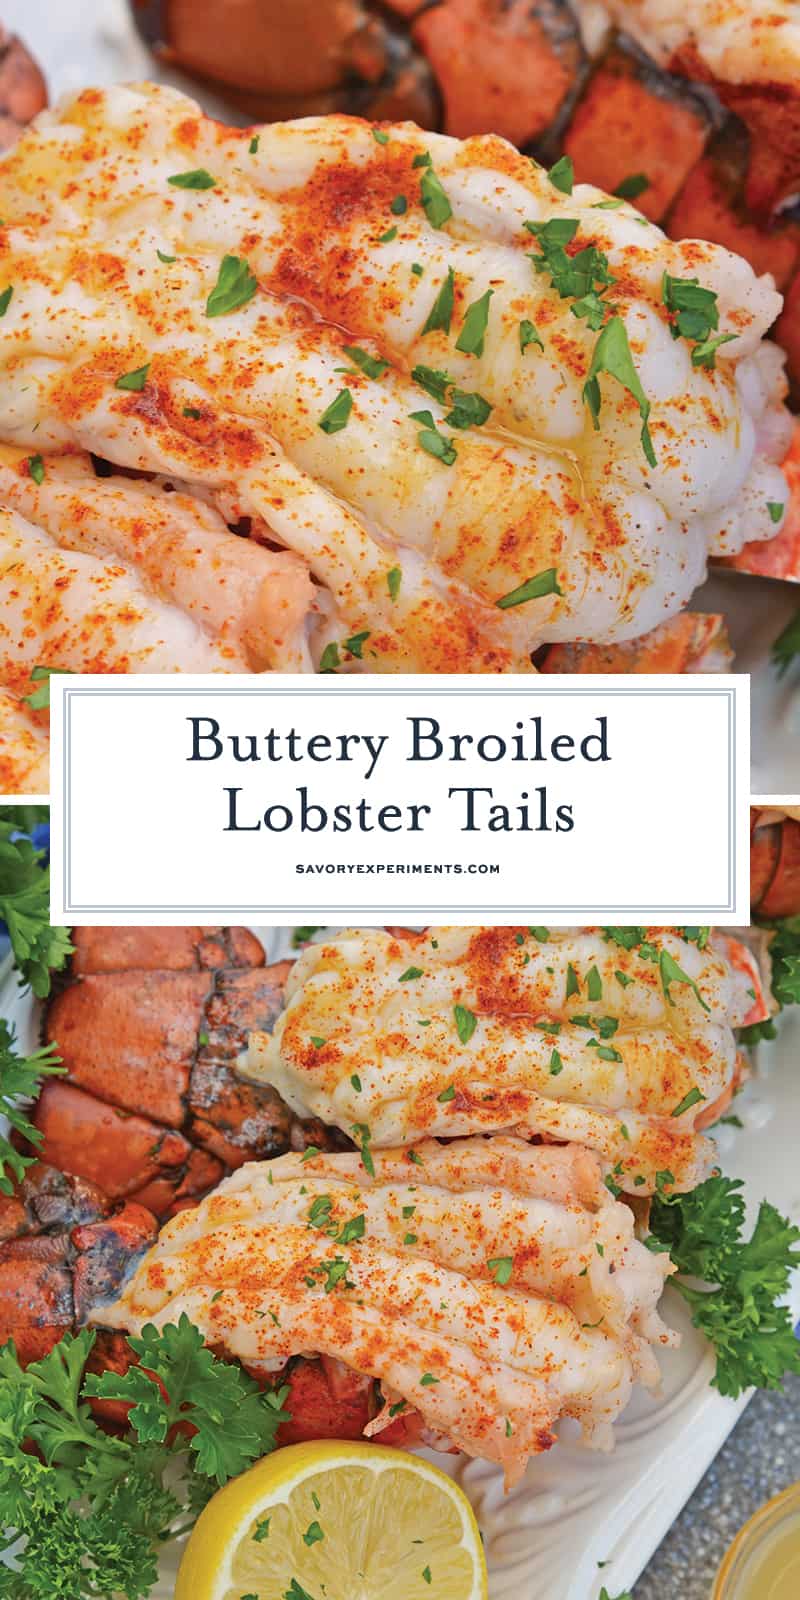 Broiled Lobster Tails with Lemon Butter brings the feel of a fancy restaurant right to the comfort of your own home and is ready in just minutes! #howtocooklobstertails #broiledlobstertails www.savoryexperiments.com